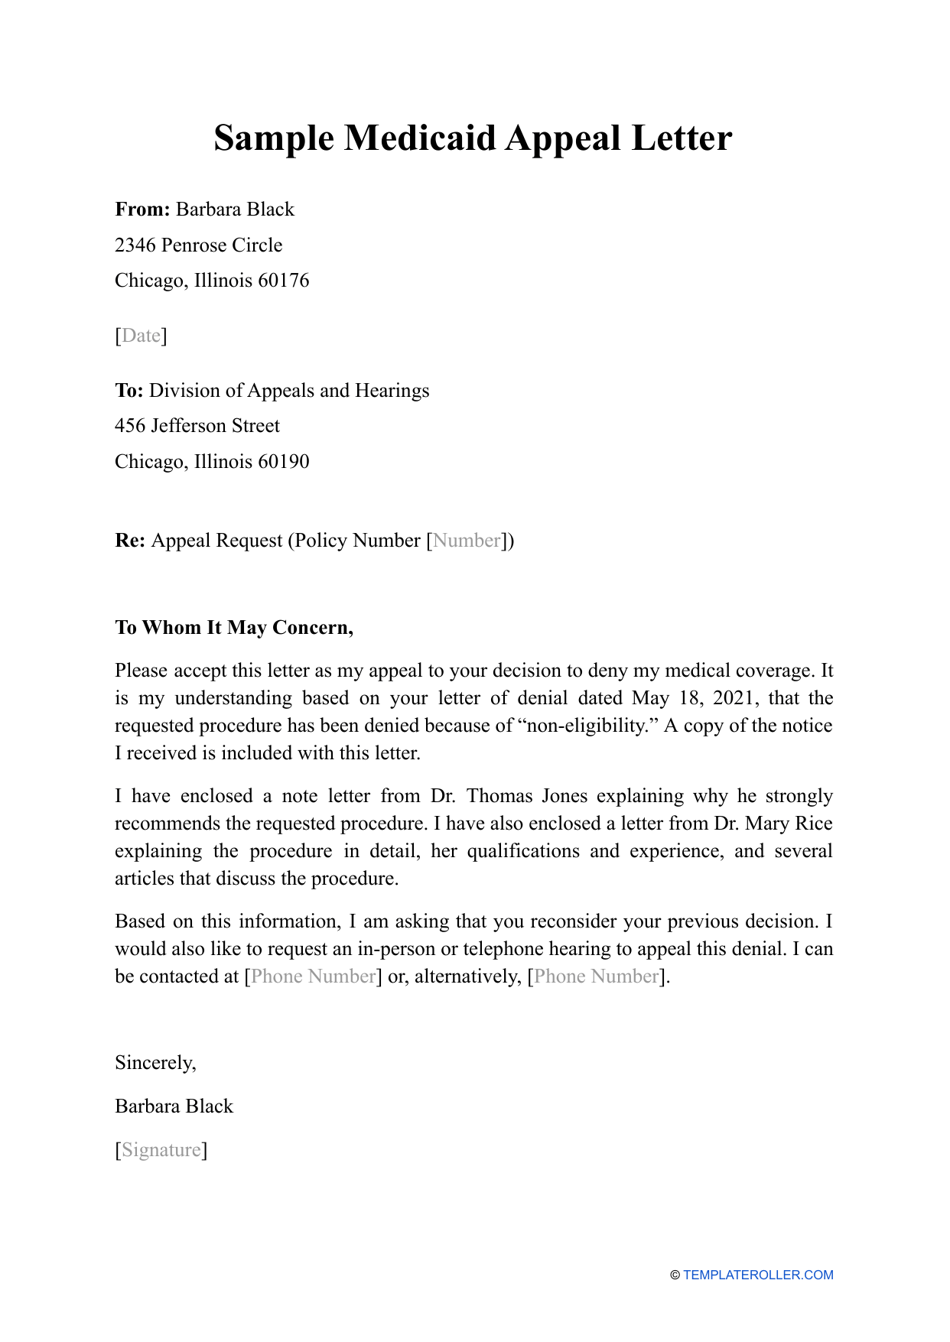 Sample Medicaid Appeal Letter, Page 1